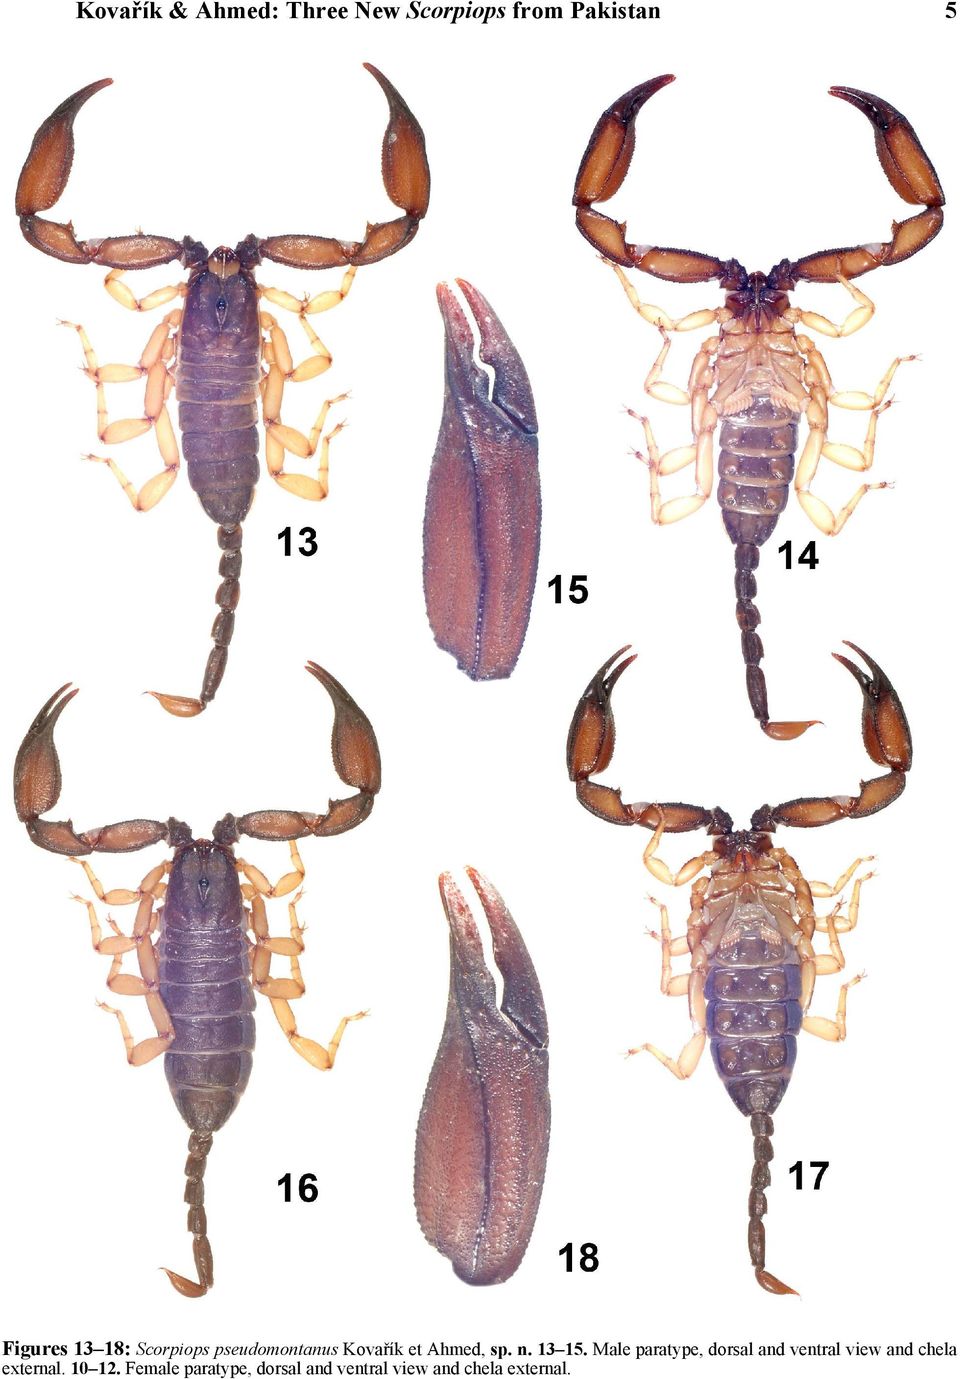 Male paratype, dorsal and ventral view and chela external.